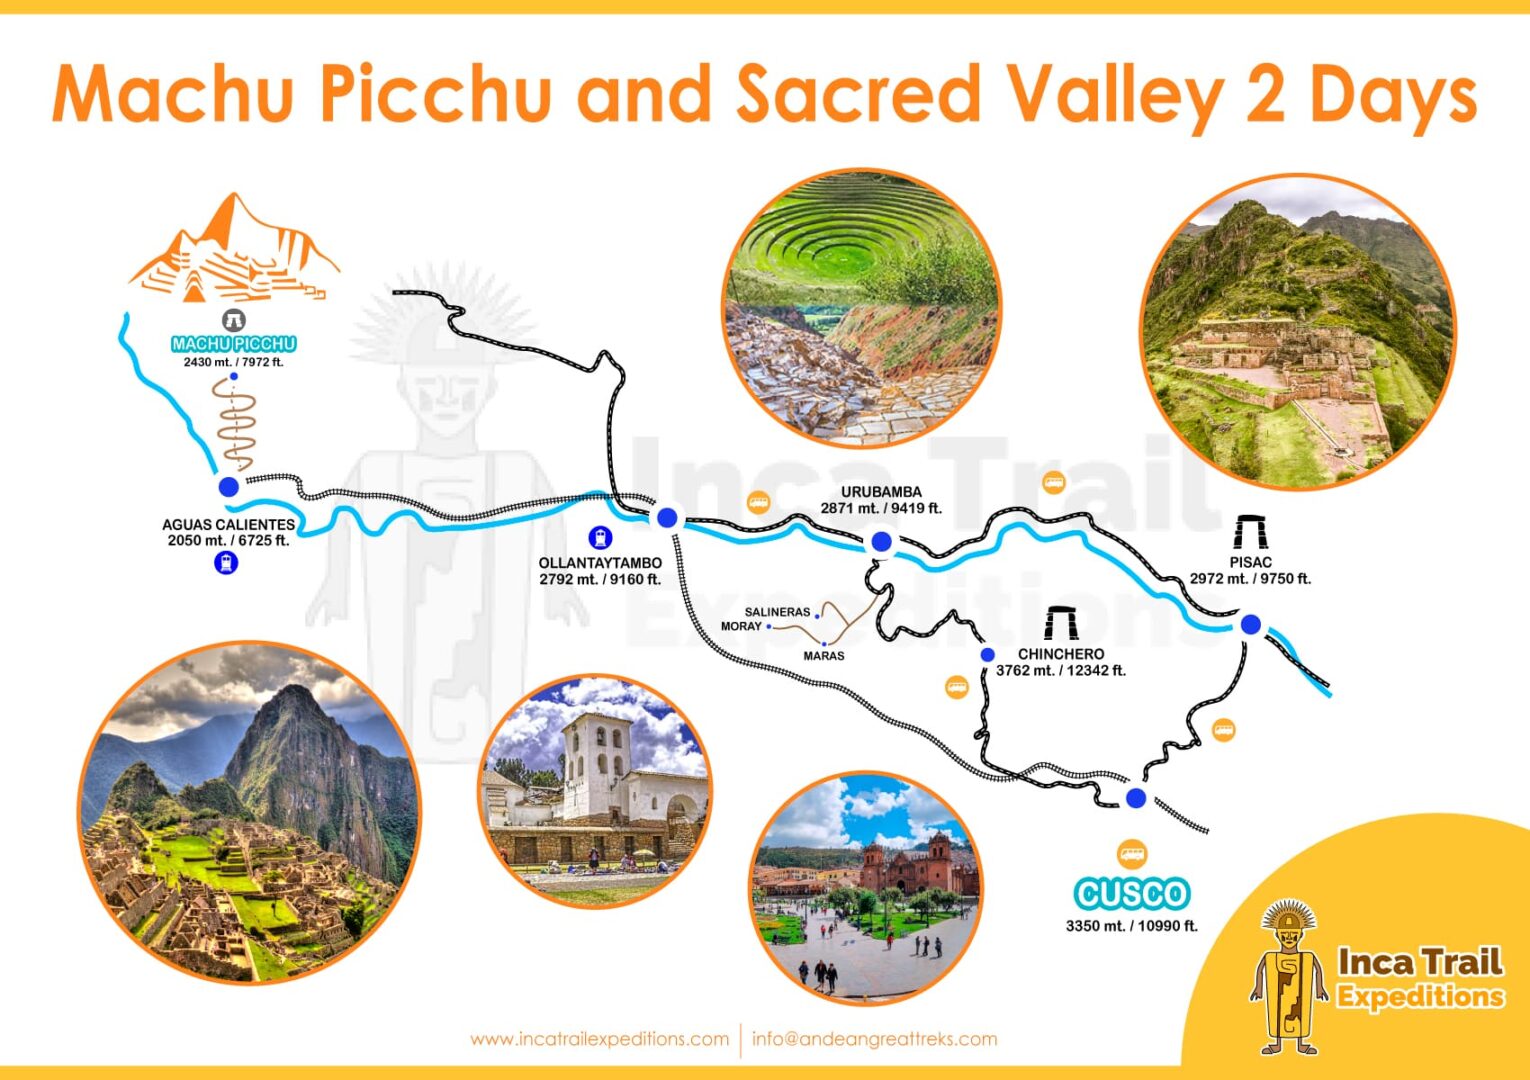 MACHU-PICCHU-AND-SACRED-VALLEY-2-DAYS-BY-INCA-TRAIL-EXPEDITIONS